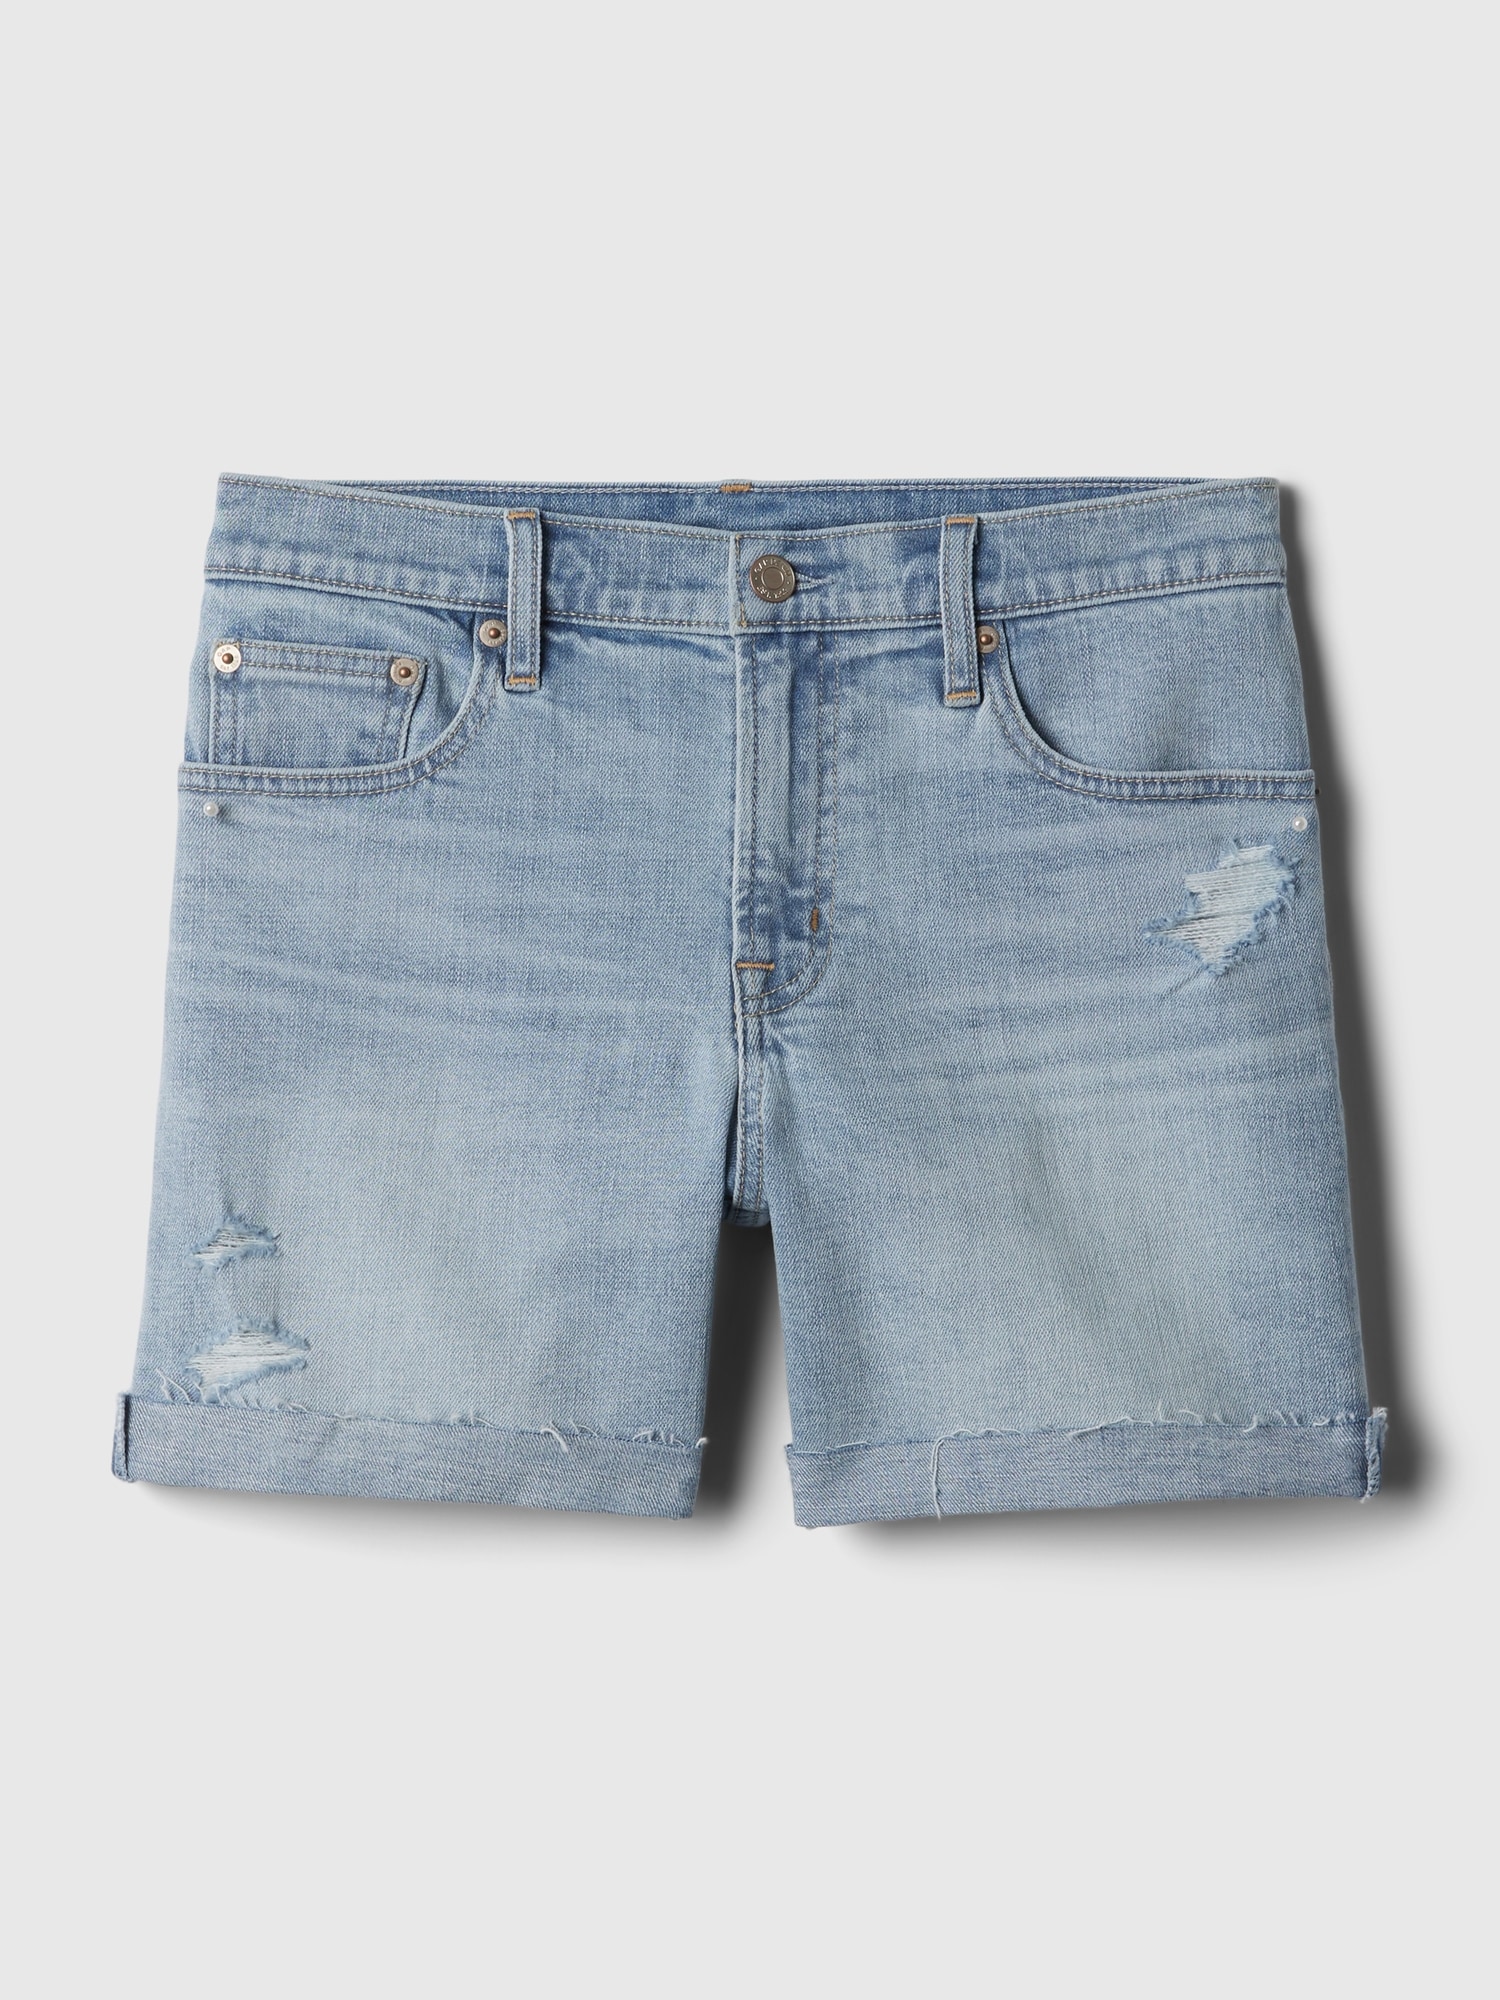 All my tall girls can relate to finding denim shorts that fit right, i